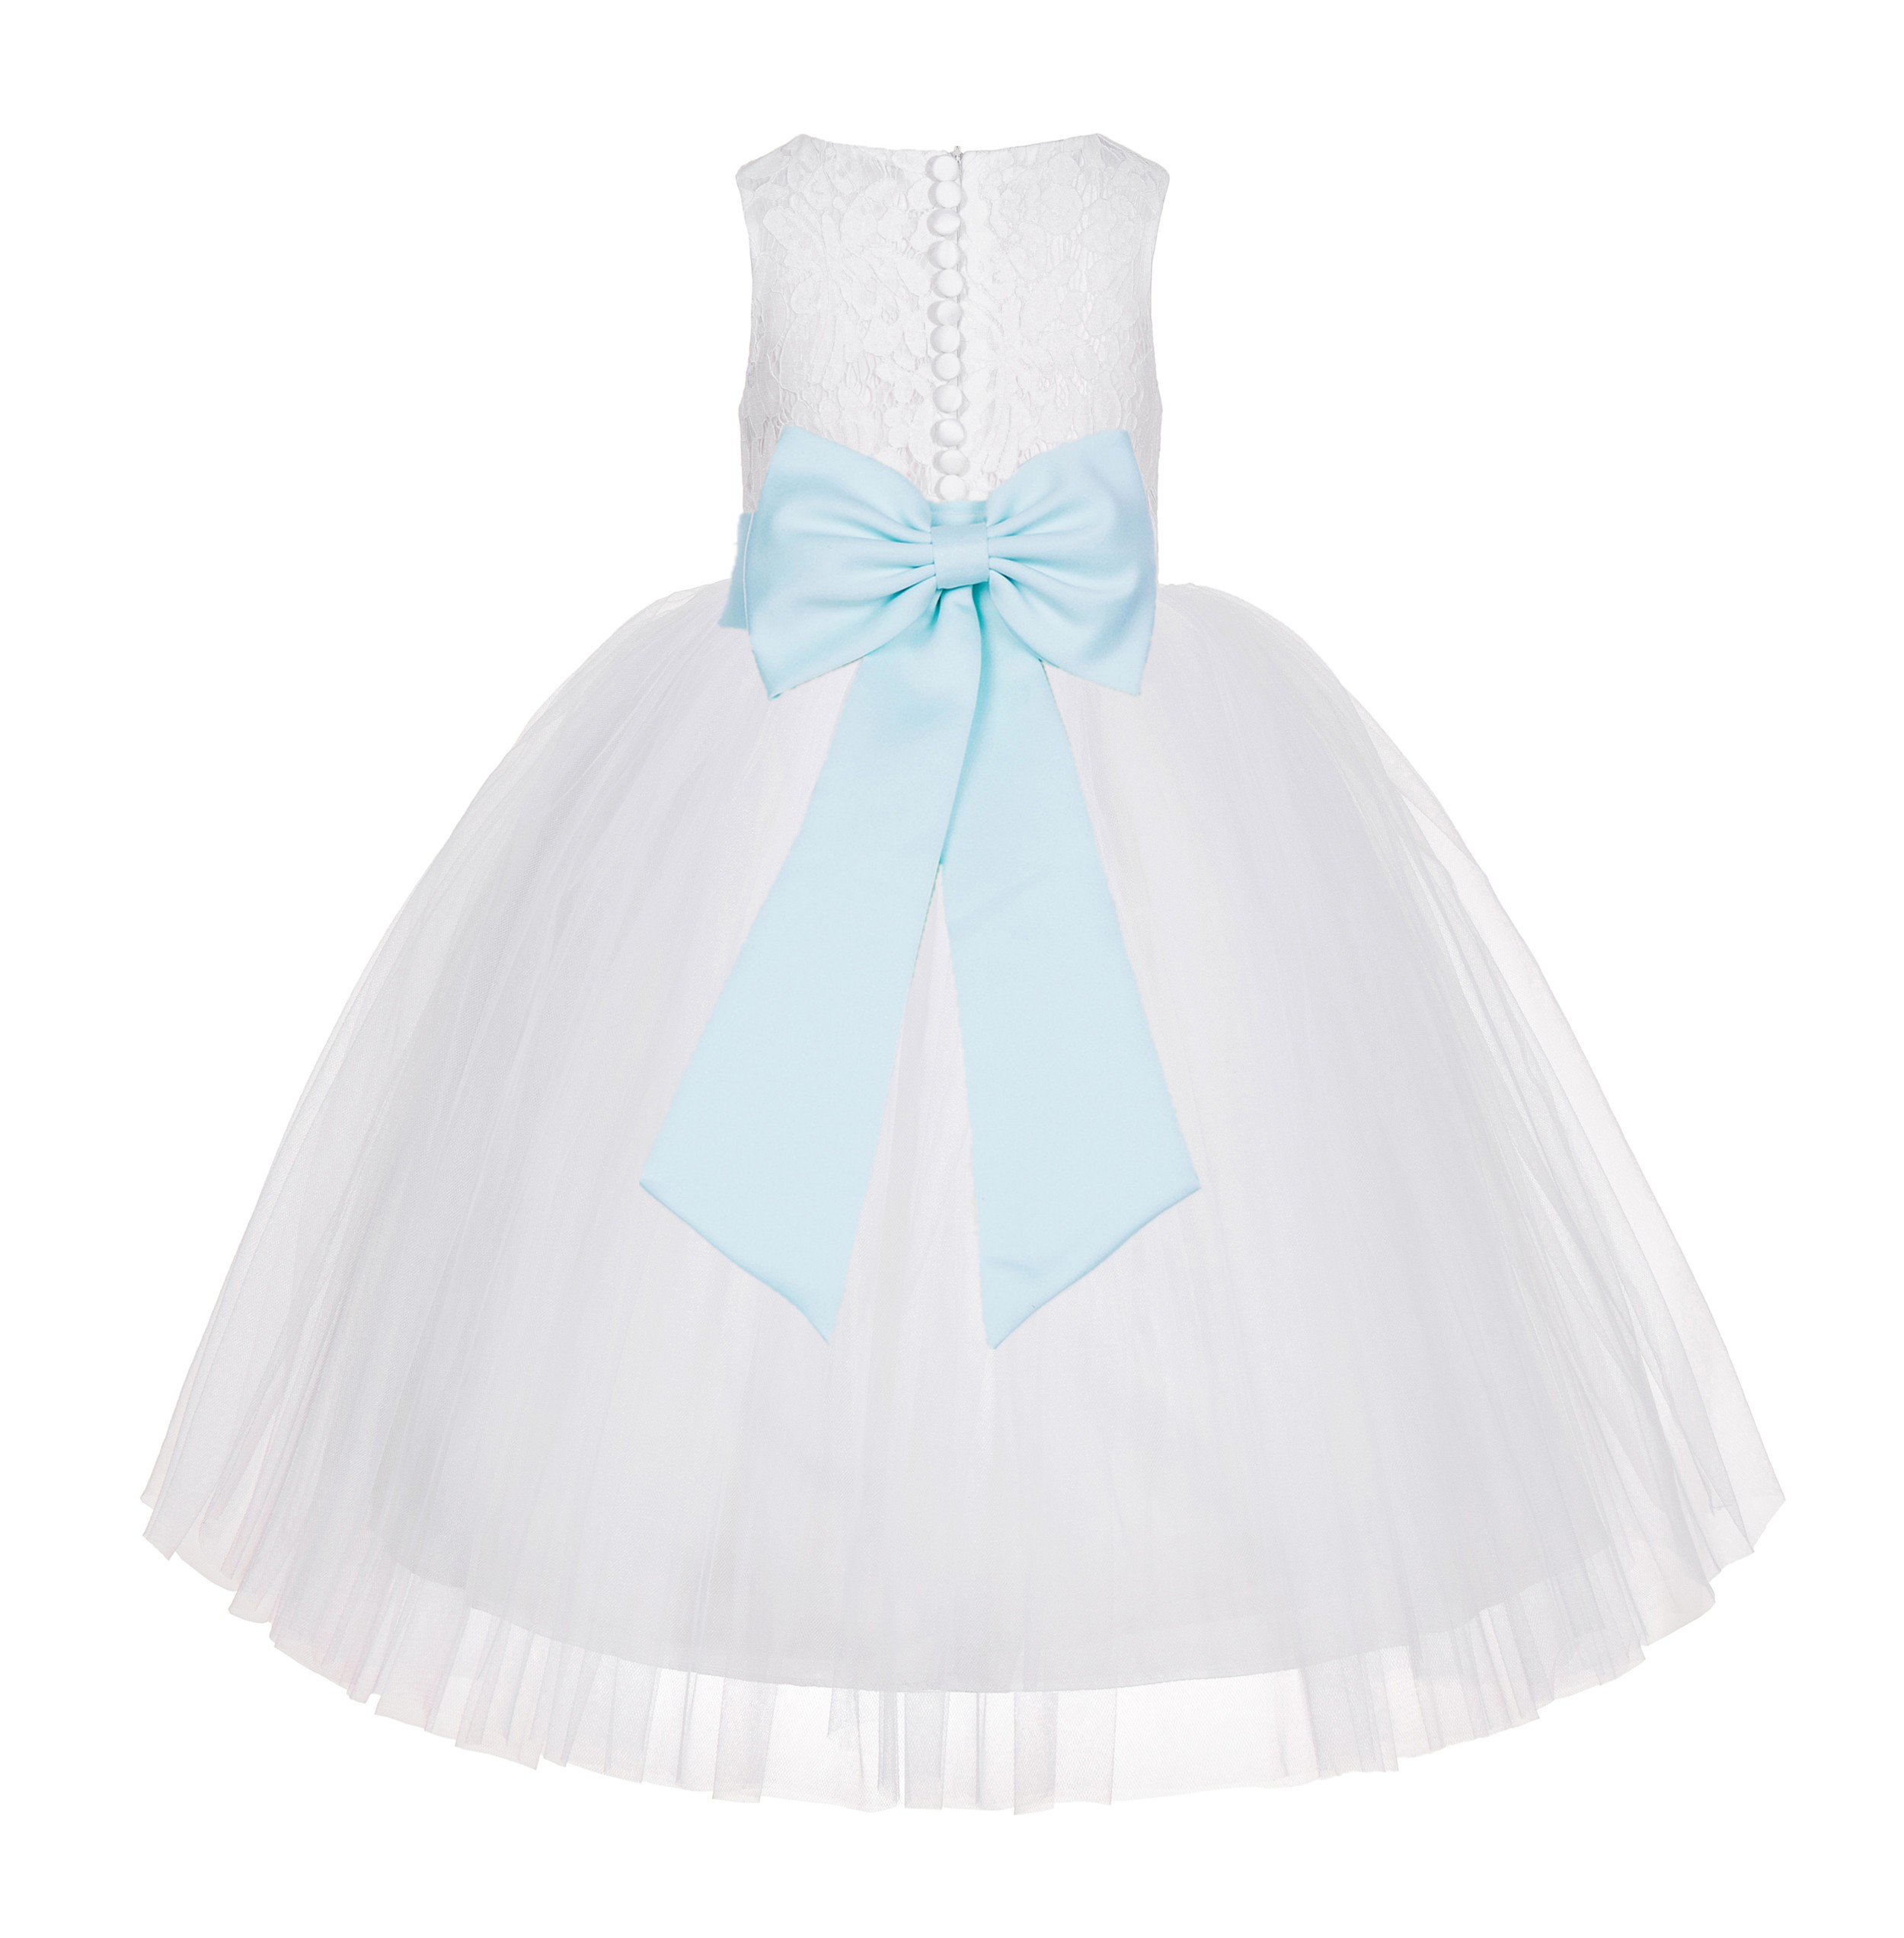 White / Mint Floral Lace Flower Girl Dress White Ball Gown Lg7